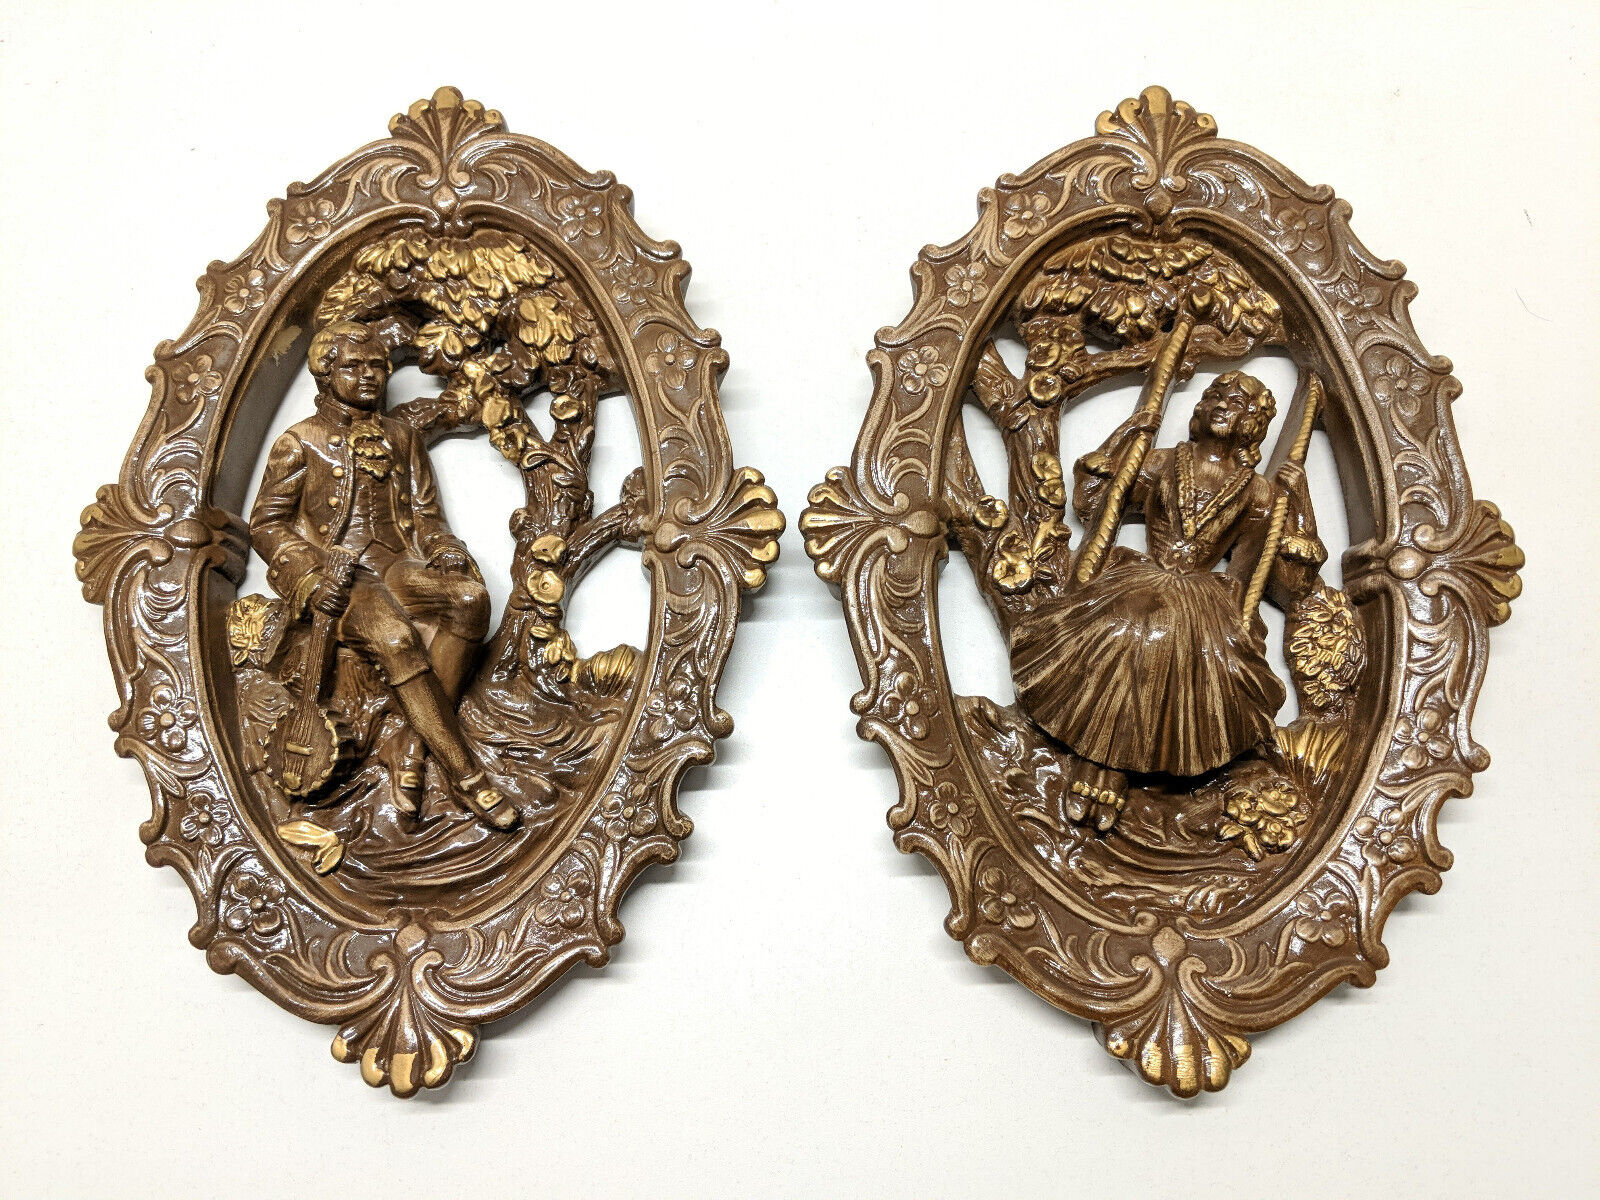 Pair of Vintage Victorian Style Man and Woman Chalkware Wall Plaques 3D